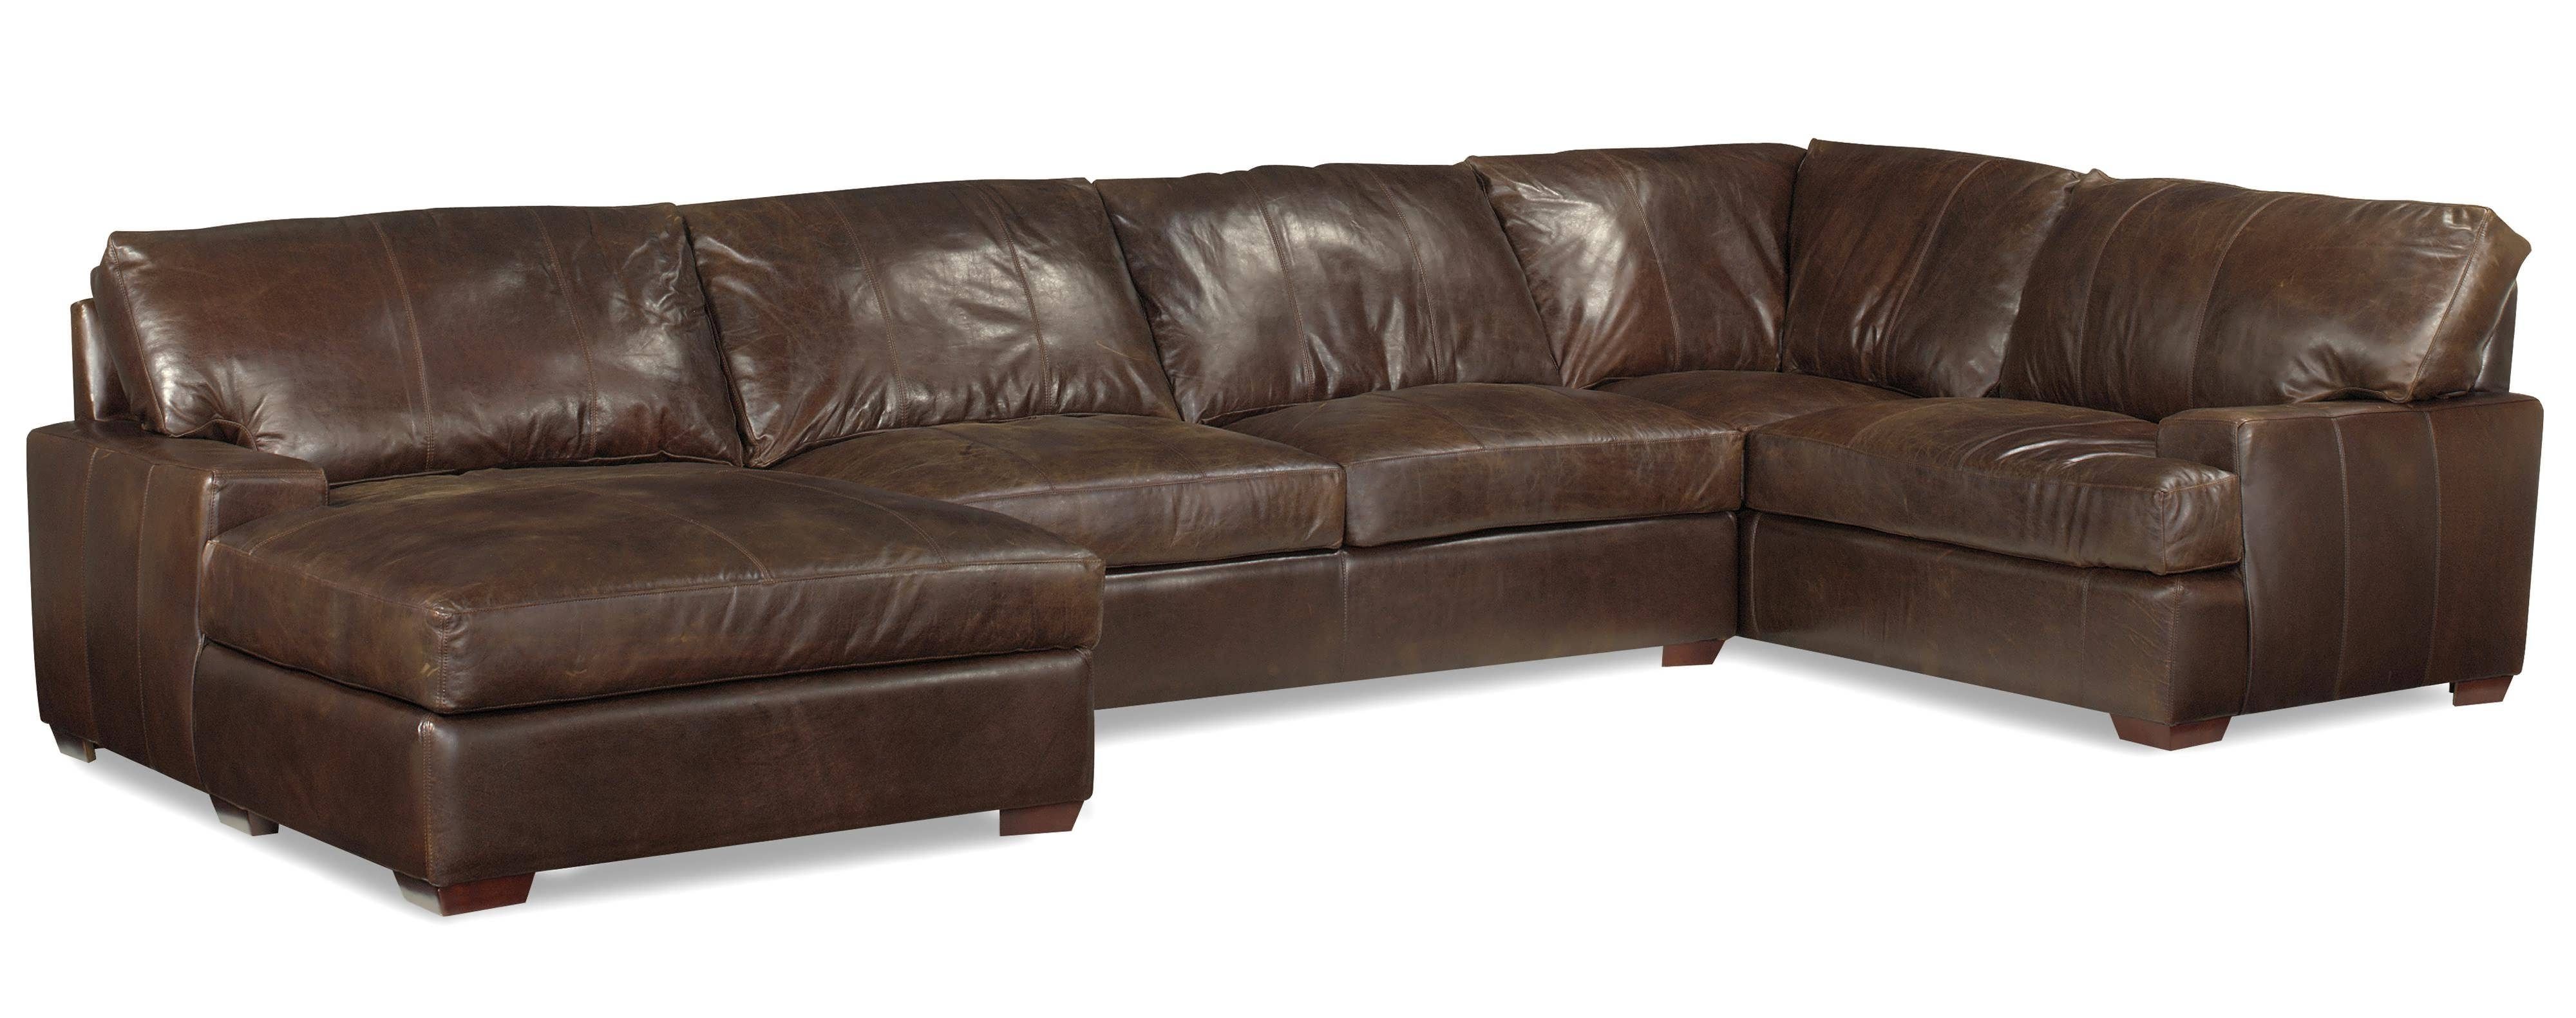 3 piece leather sectional sofa with chaise